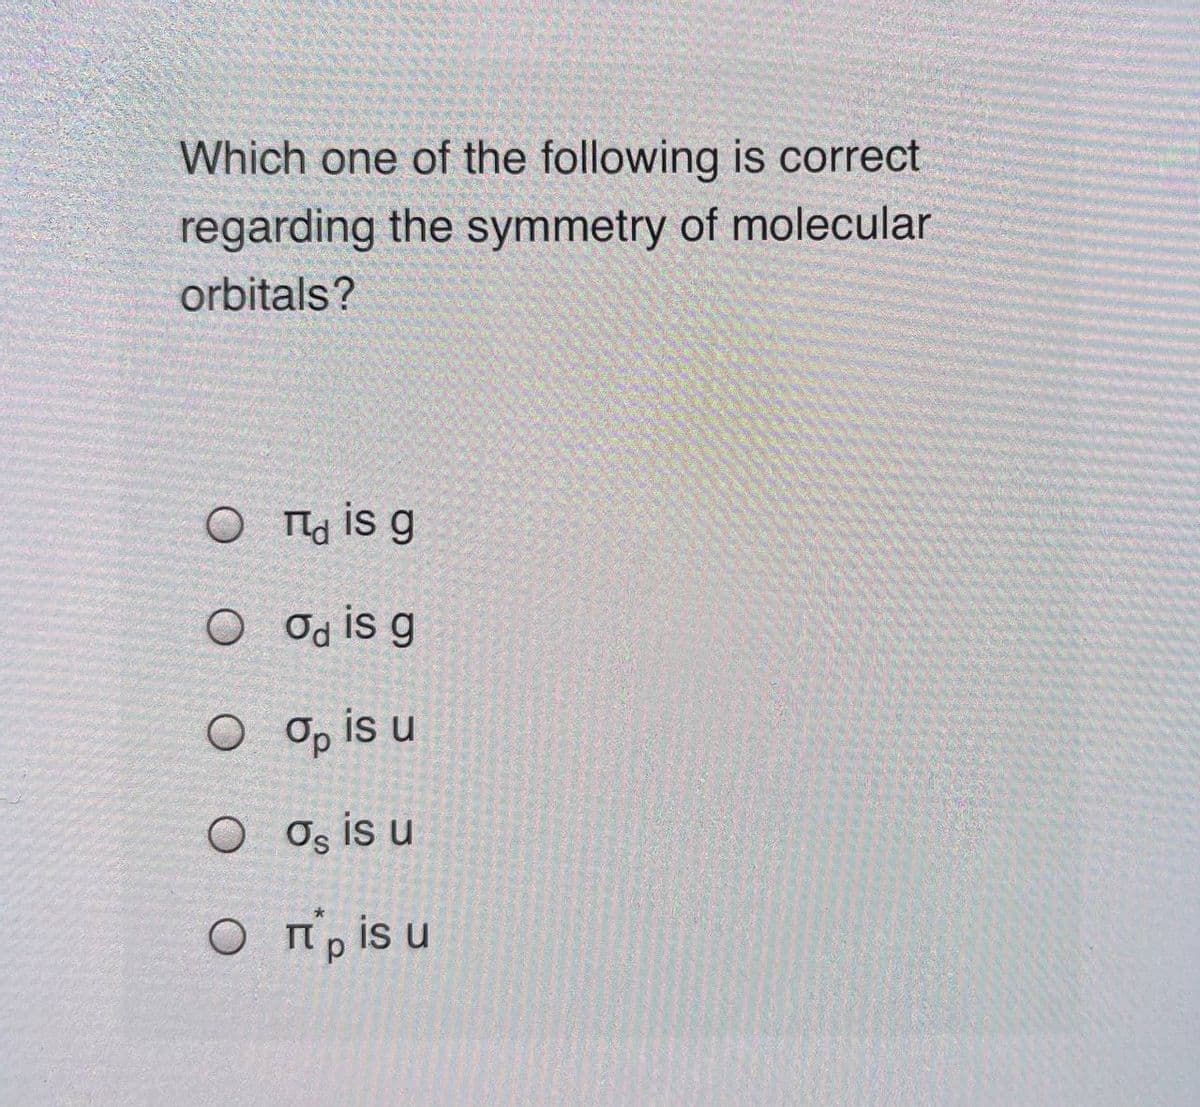 Which one of the following is correct
regarding the symmetry of molecular
orbitals?
O Ta is g
O Od is g
О о, is u
O Os is u
О Прis u
